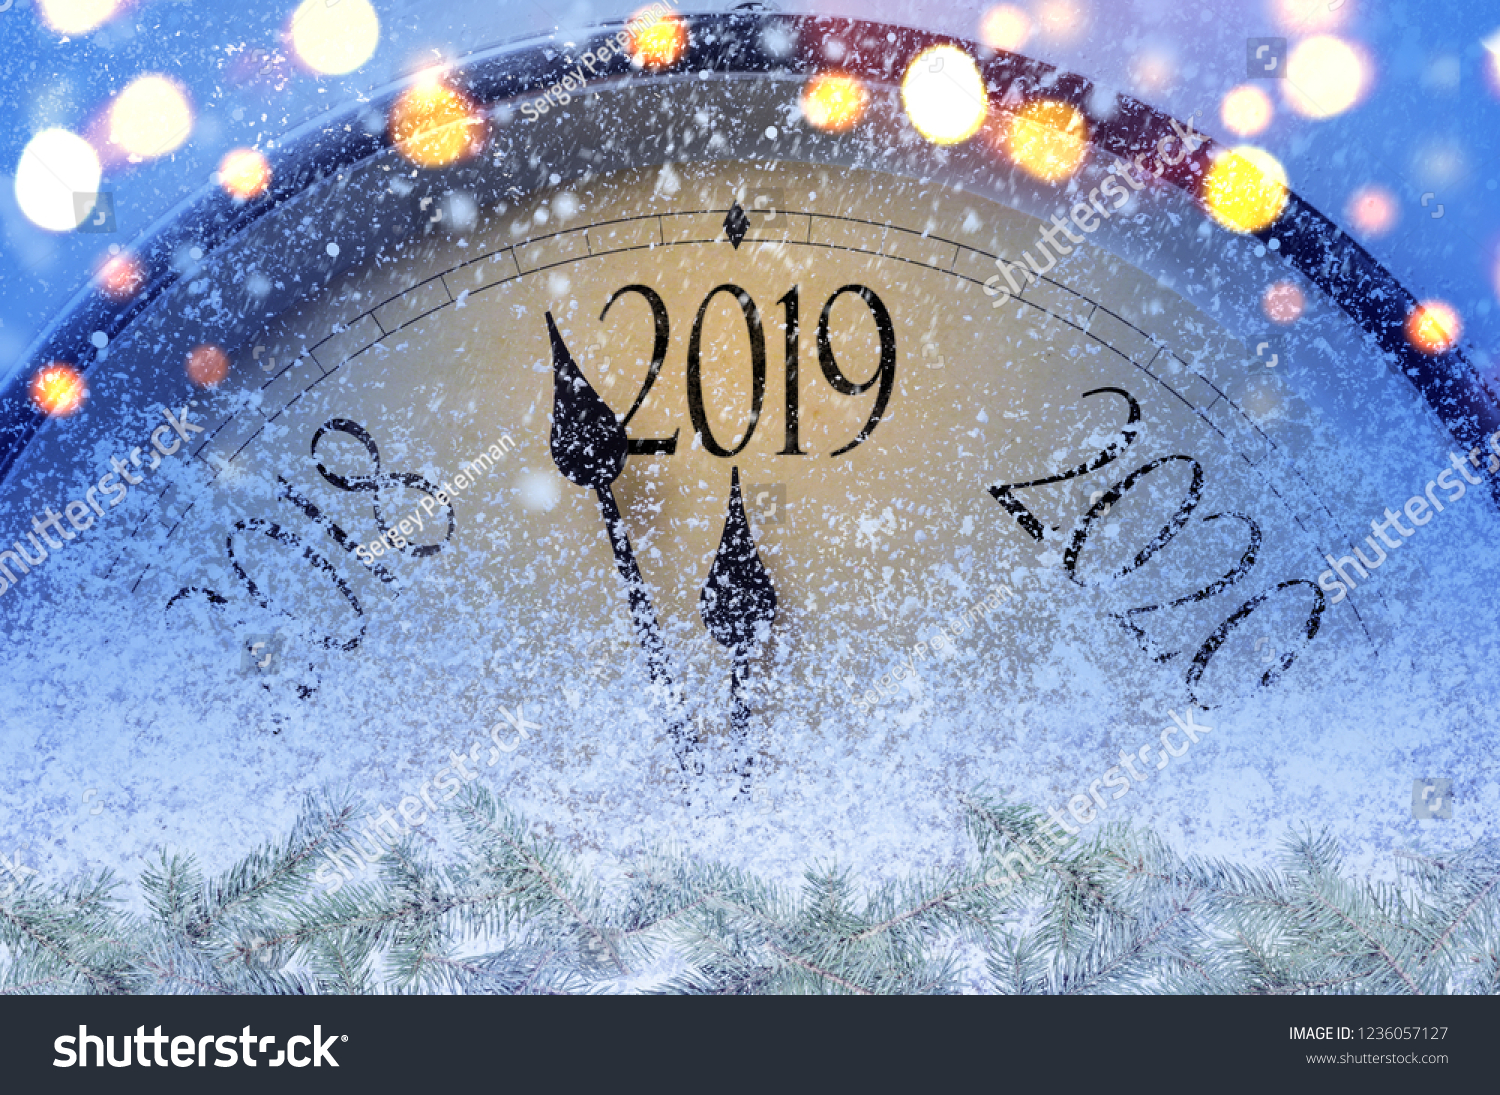 Countdown to midnight. Retro style clock counting last moments before Christmass or New Year 2019. #1236057127